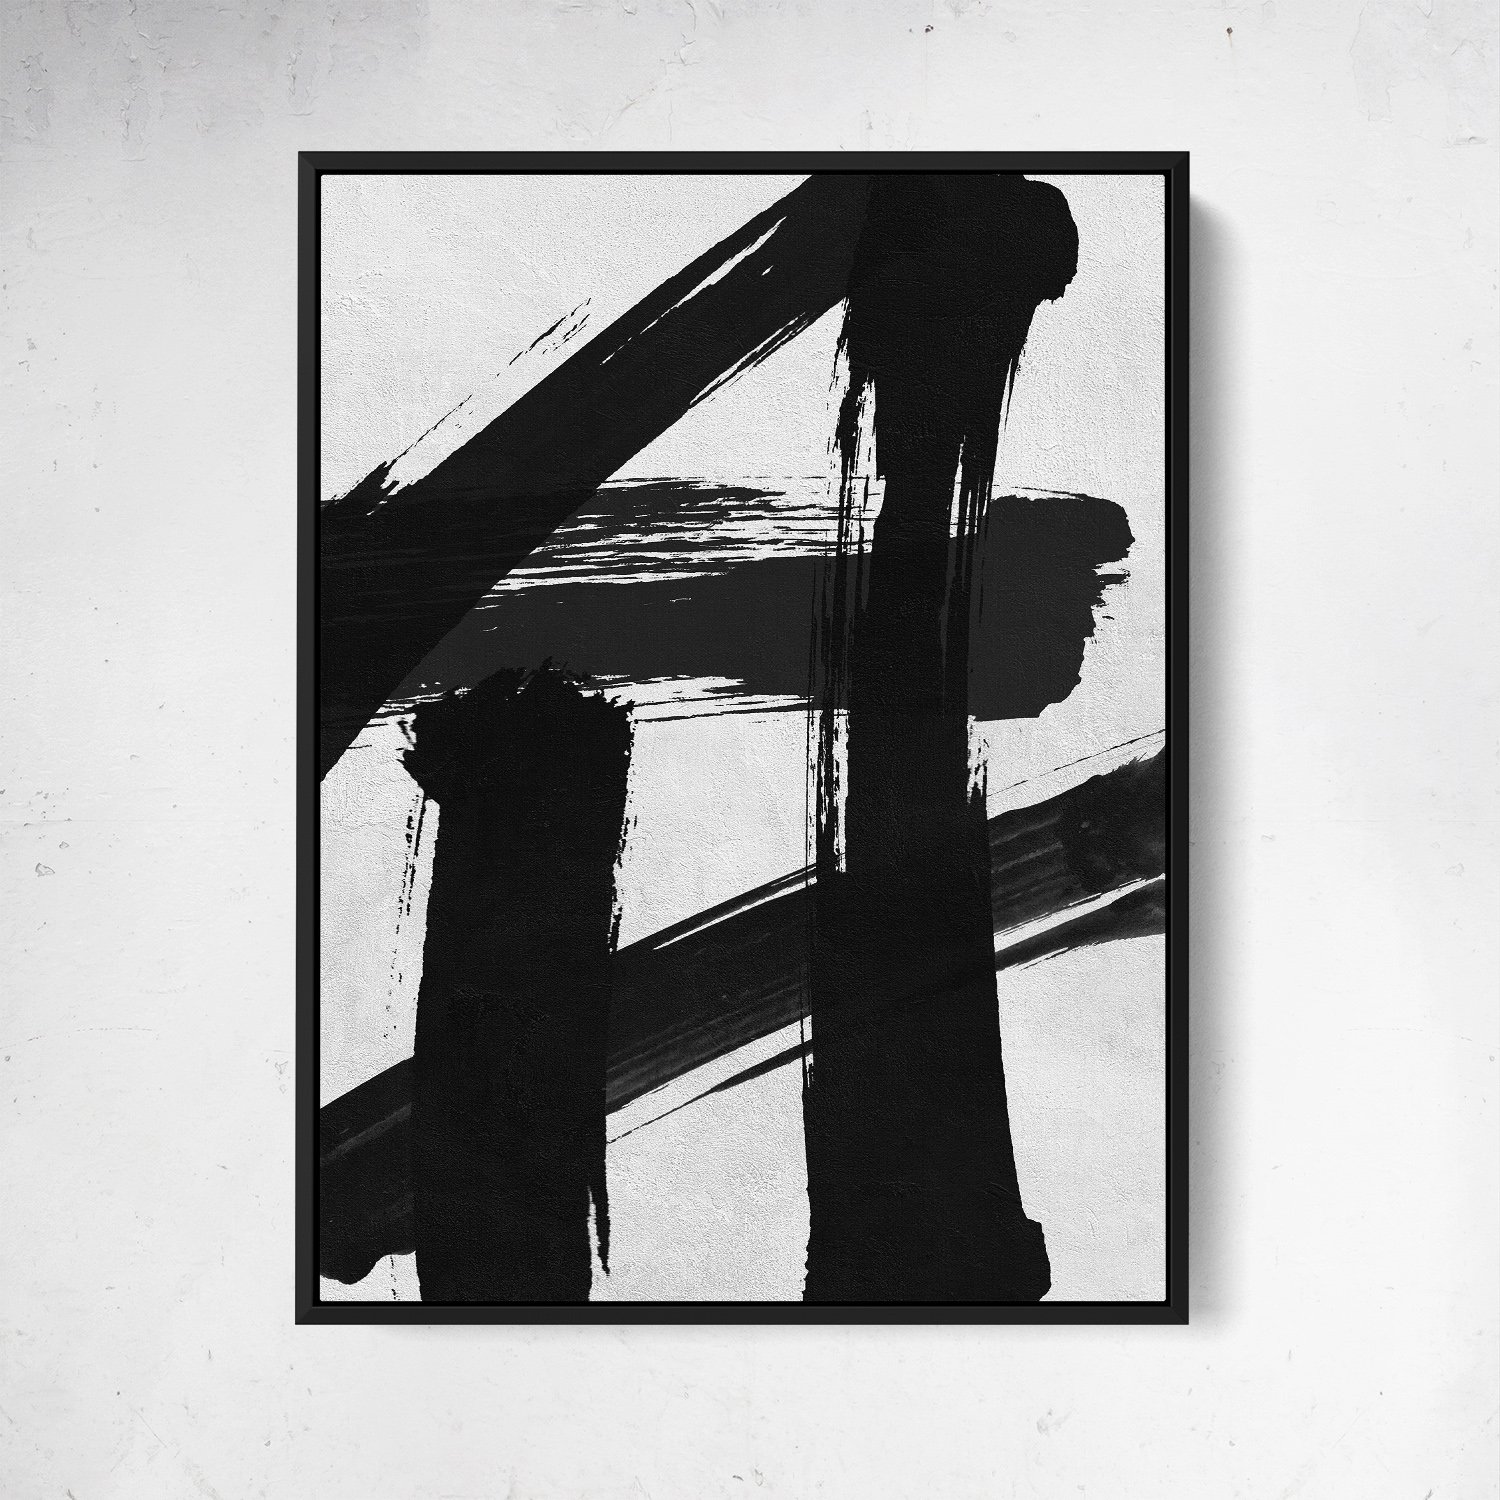 https://www.moderngeometry.com/image/cache/catalog/products/abstract-black-white-paint-strokes/abstract-black-white-paint-1/fortitude_framed_front-1500x1500.jpg